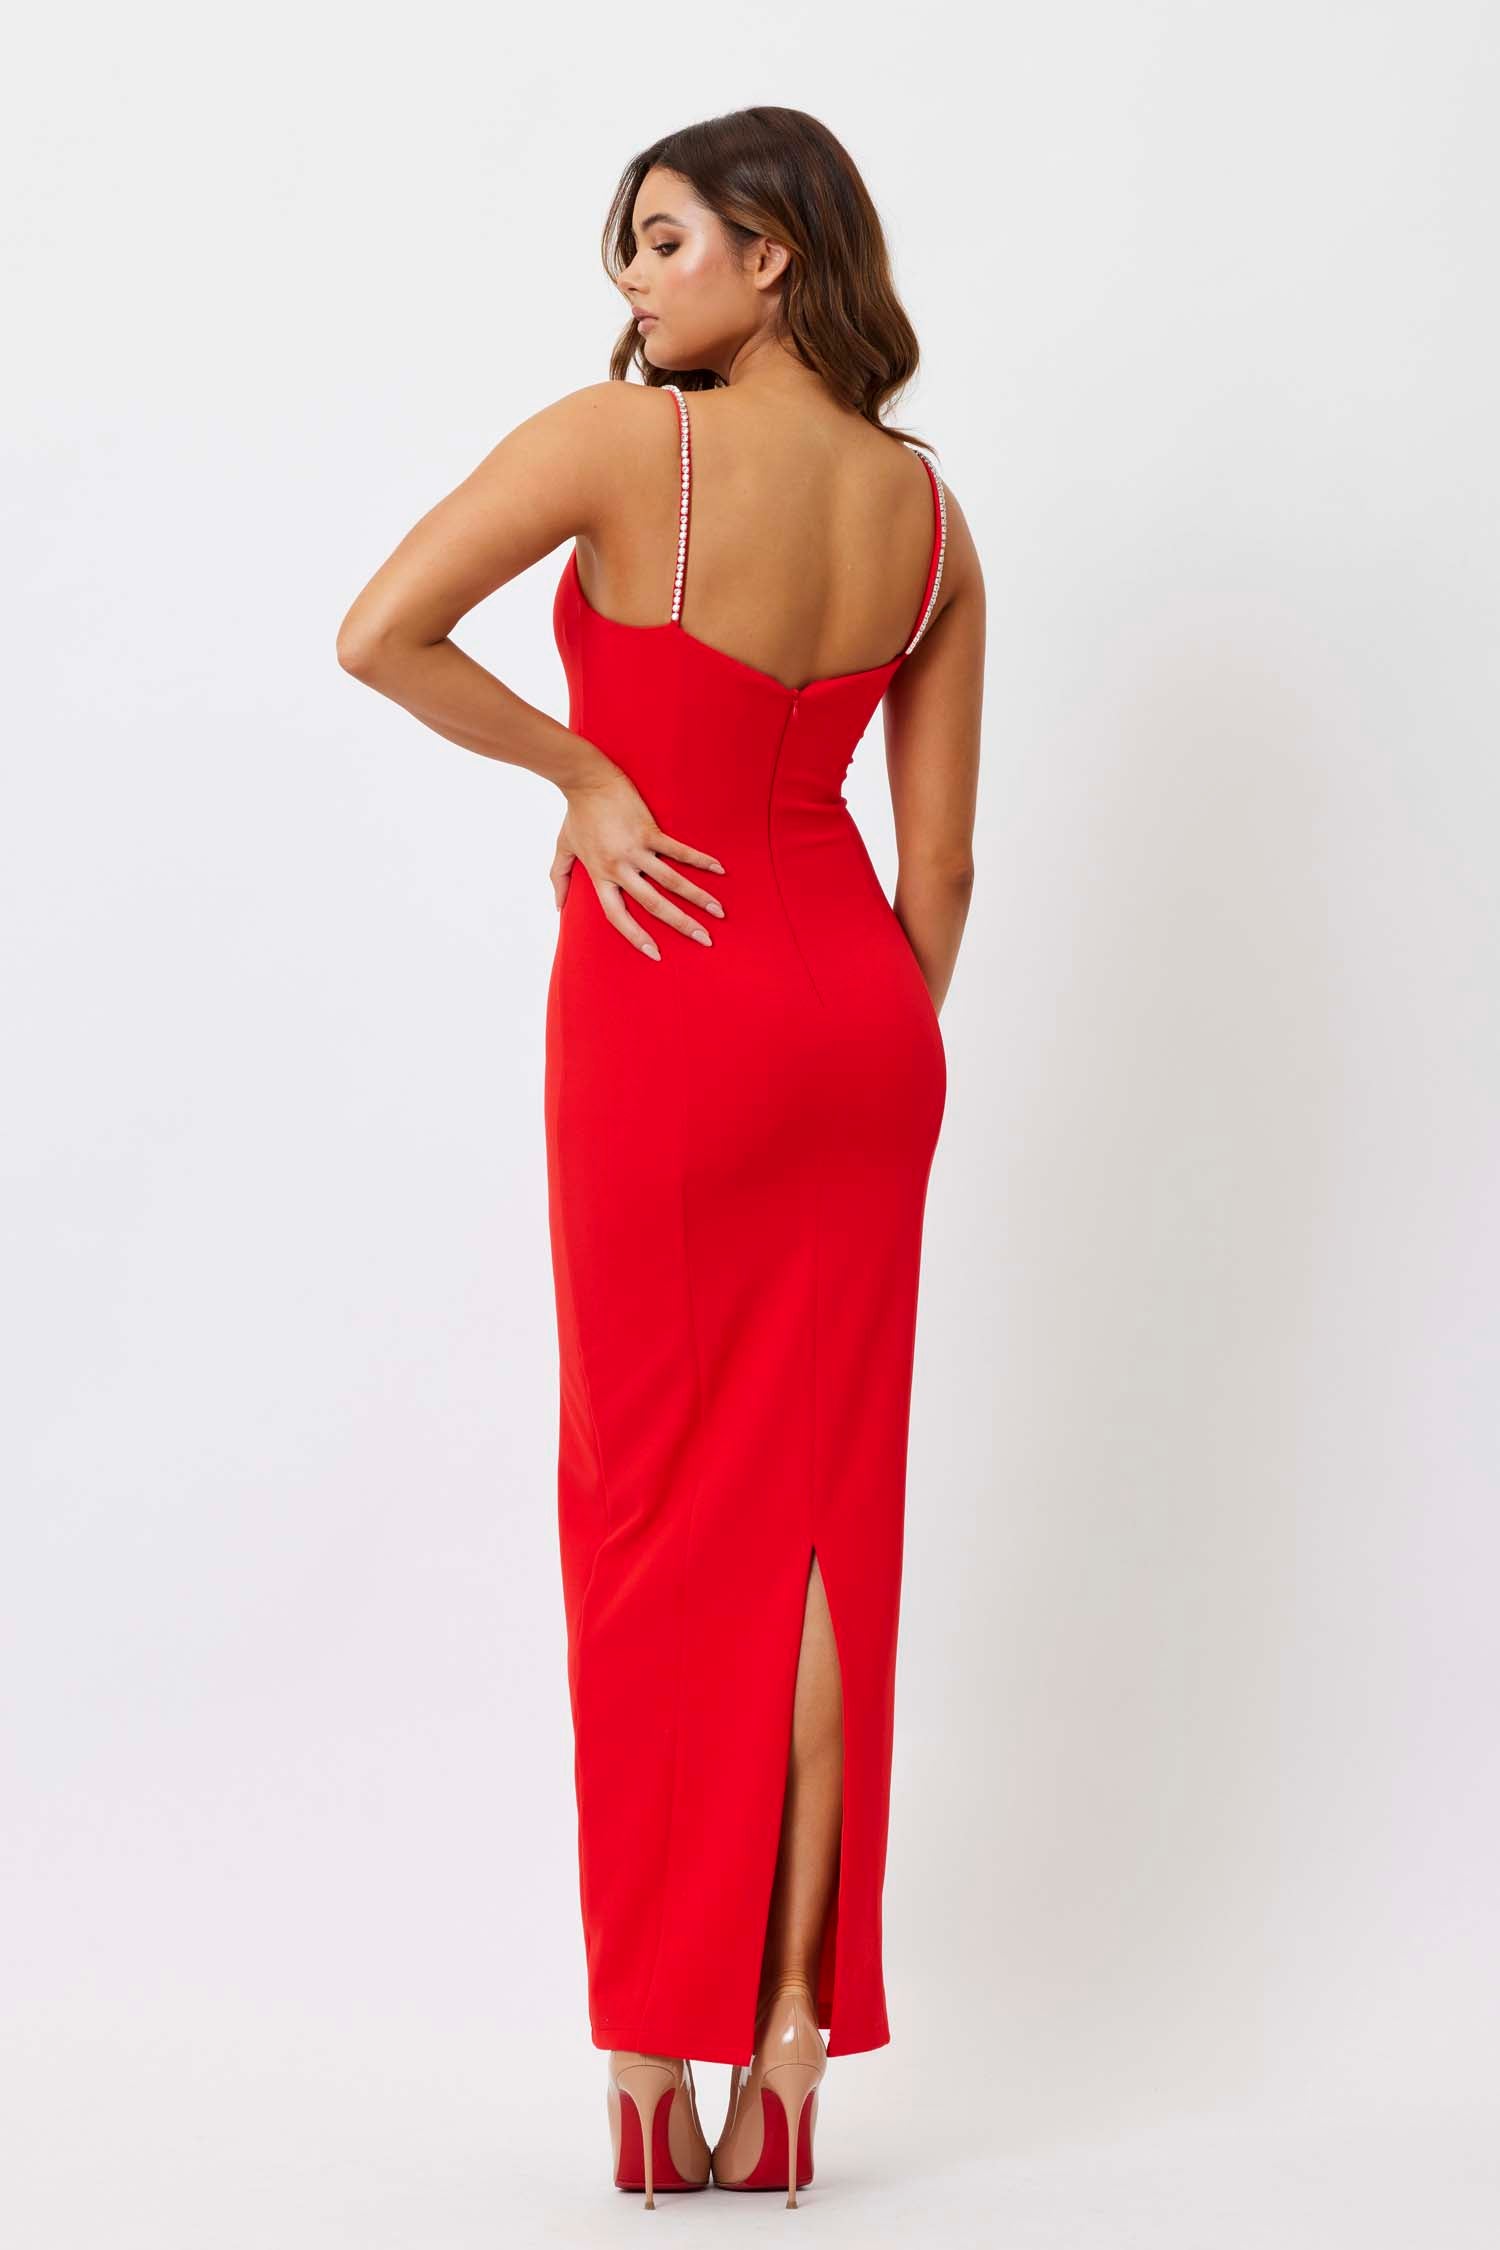 Lily Square Neck Red Dress